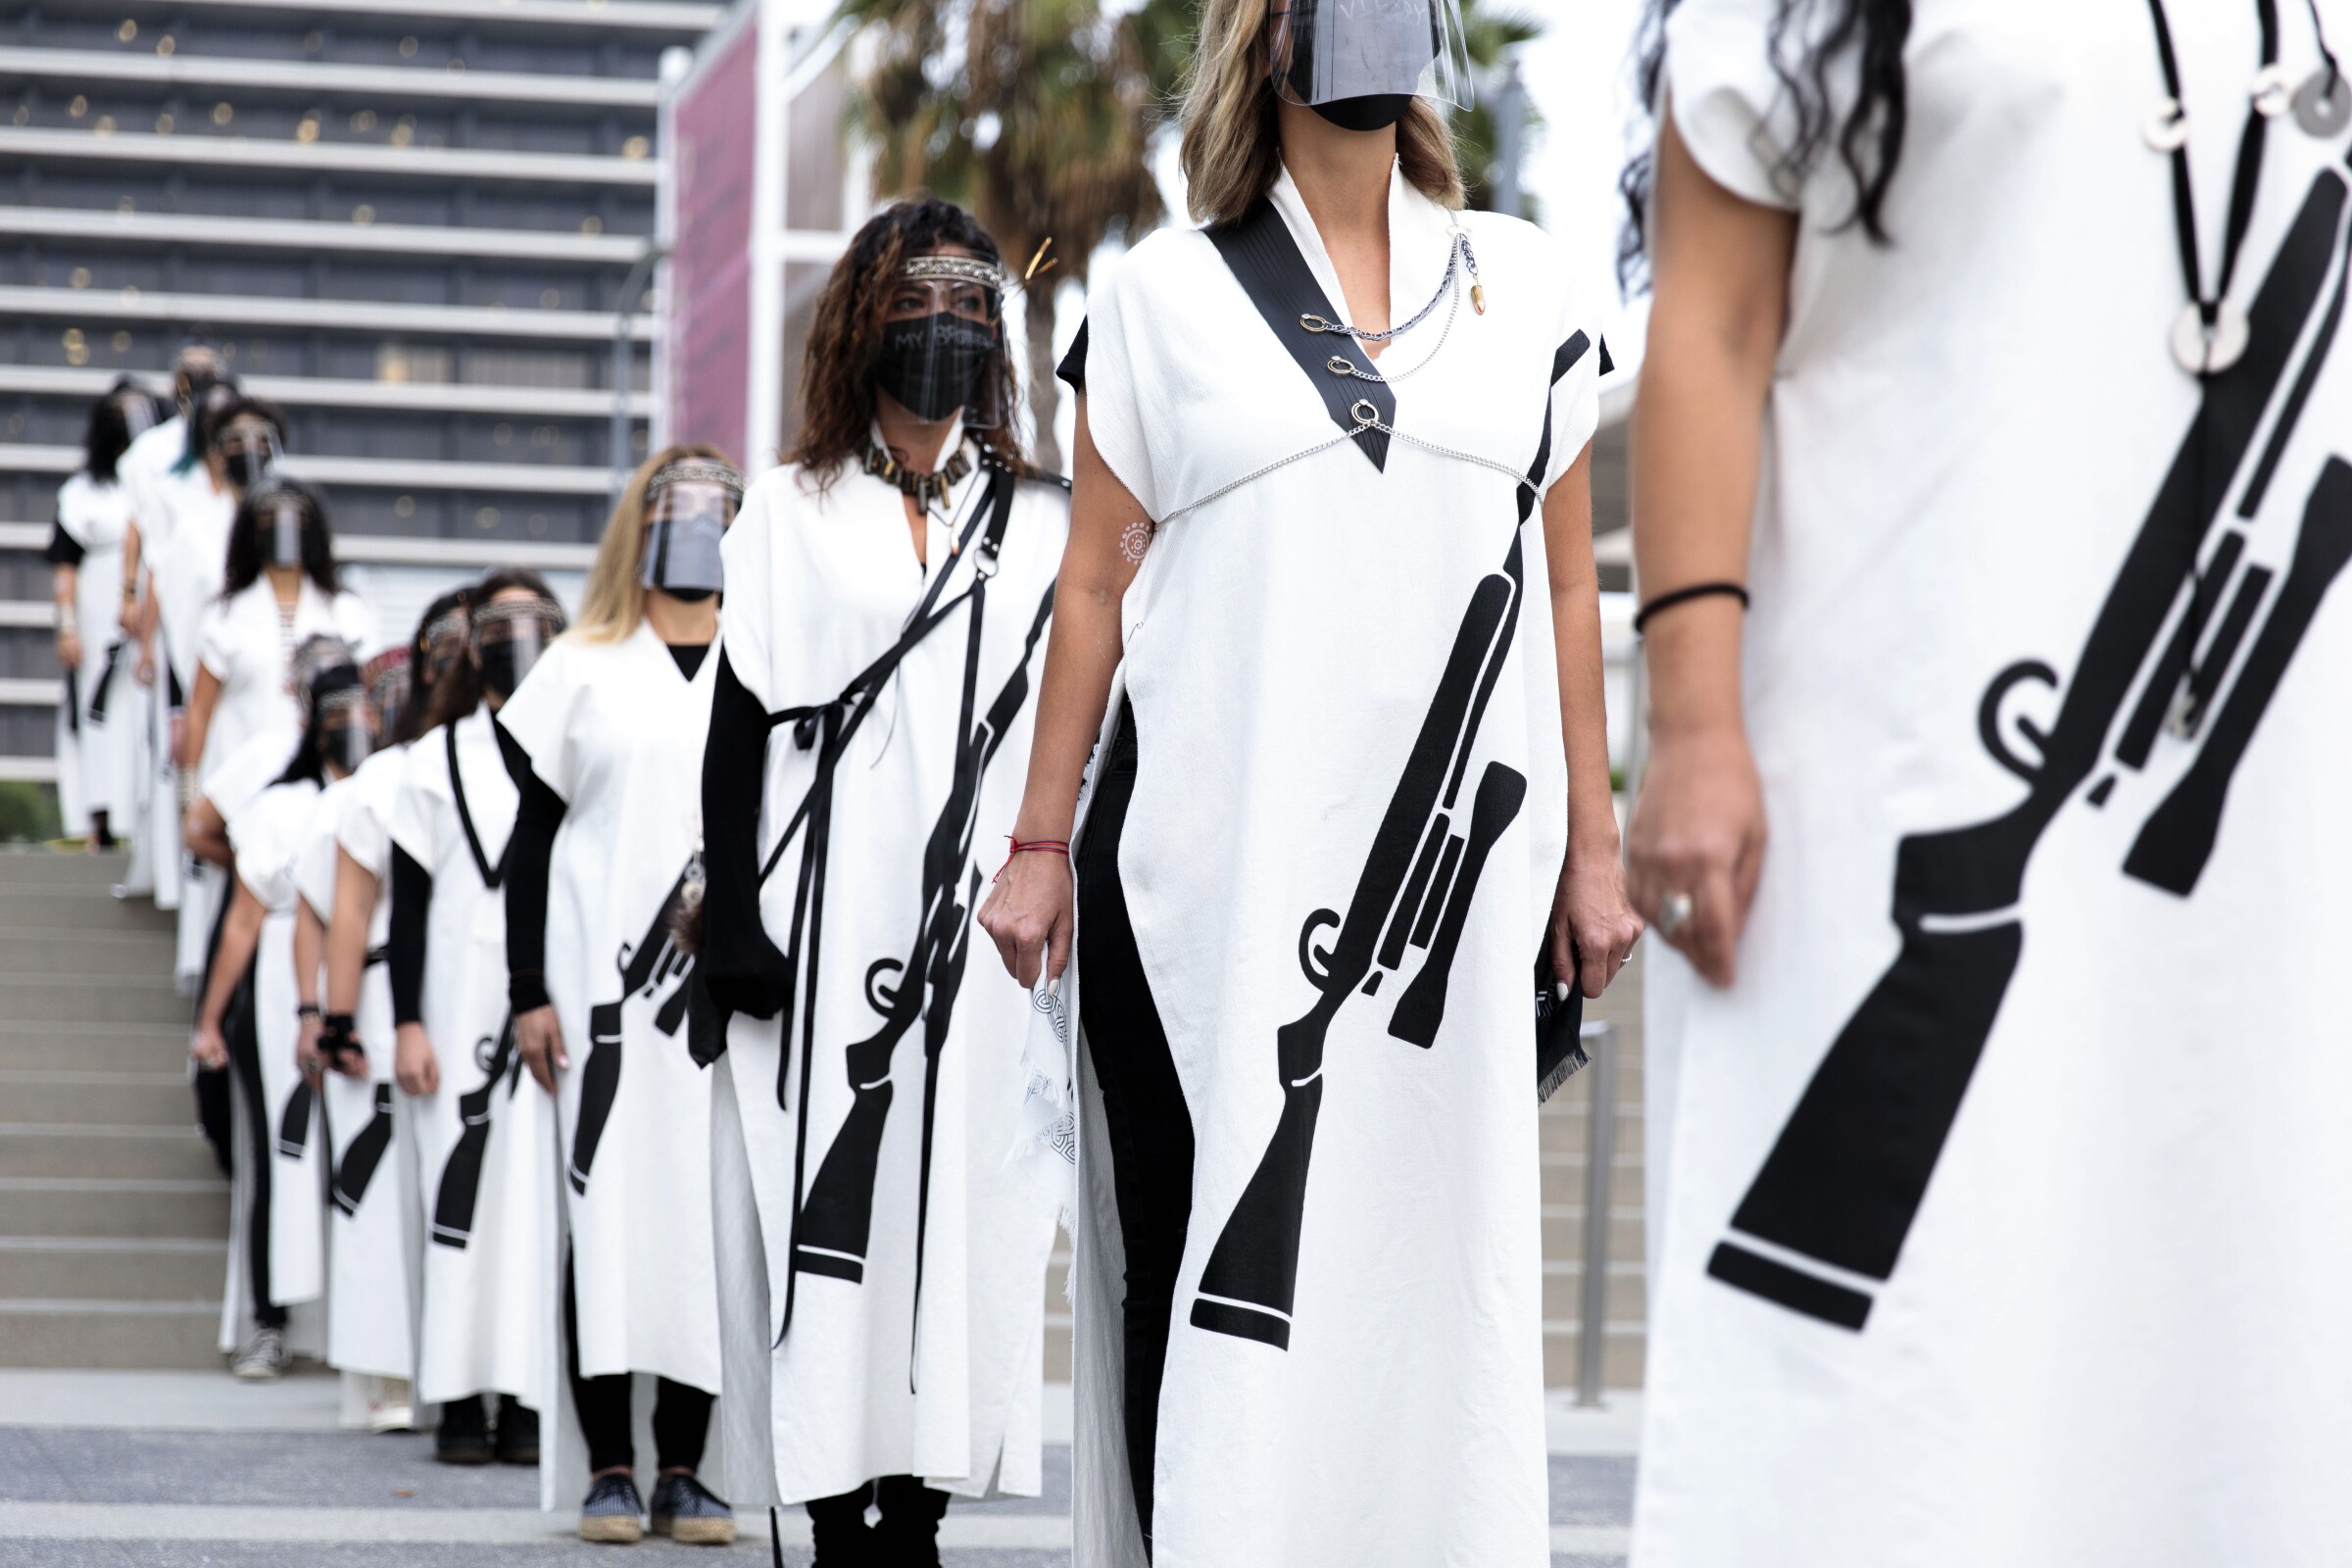 A row of women in white gowns bearing the image of a rifle parade along a downtown Los Angeles street